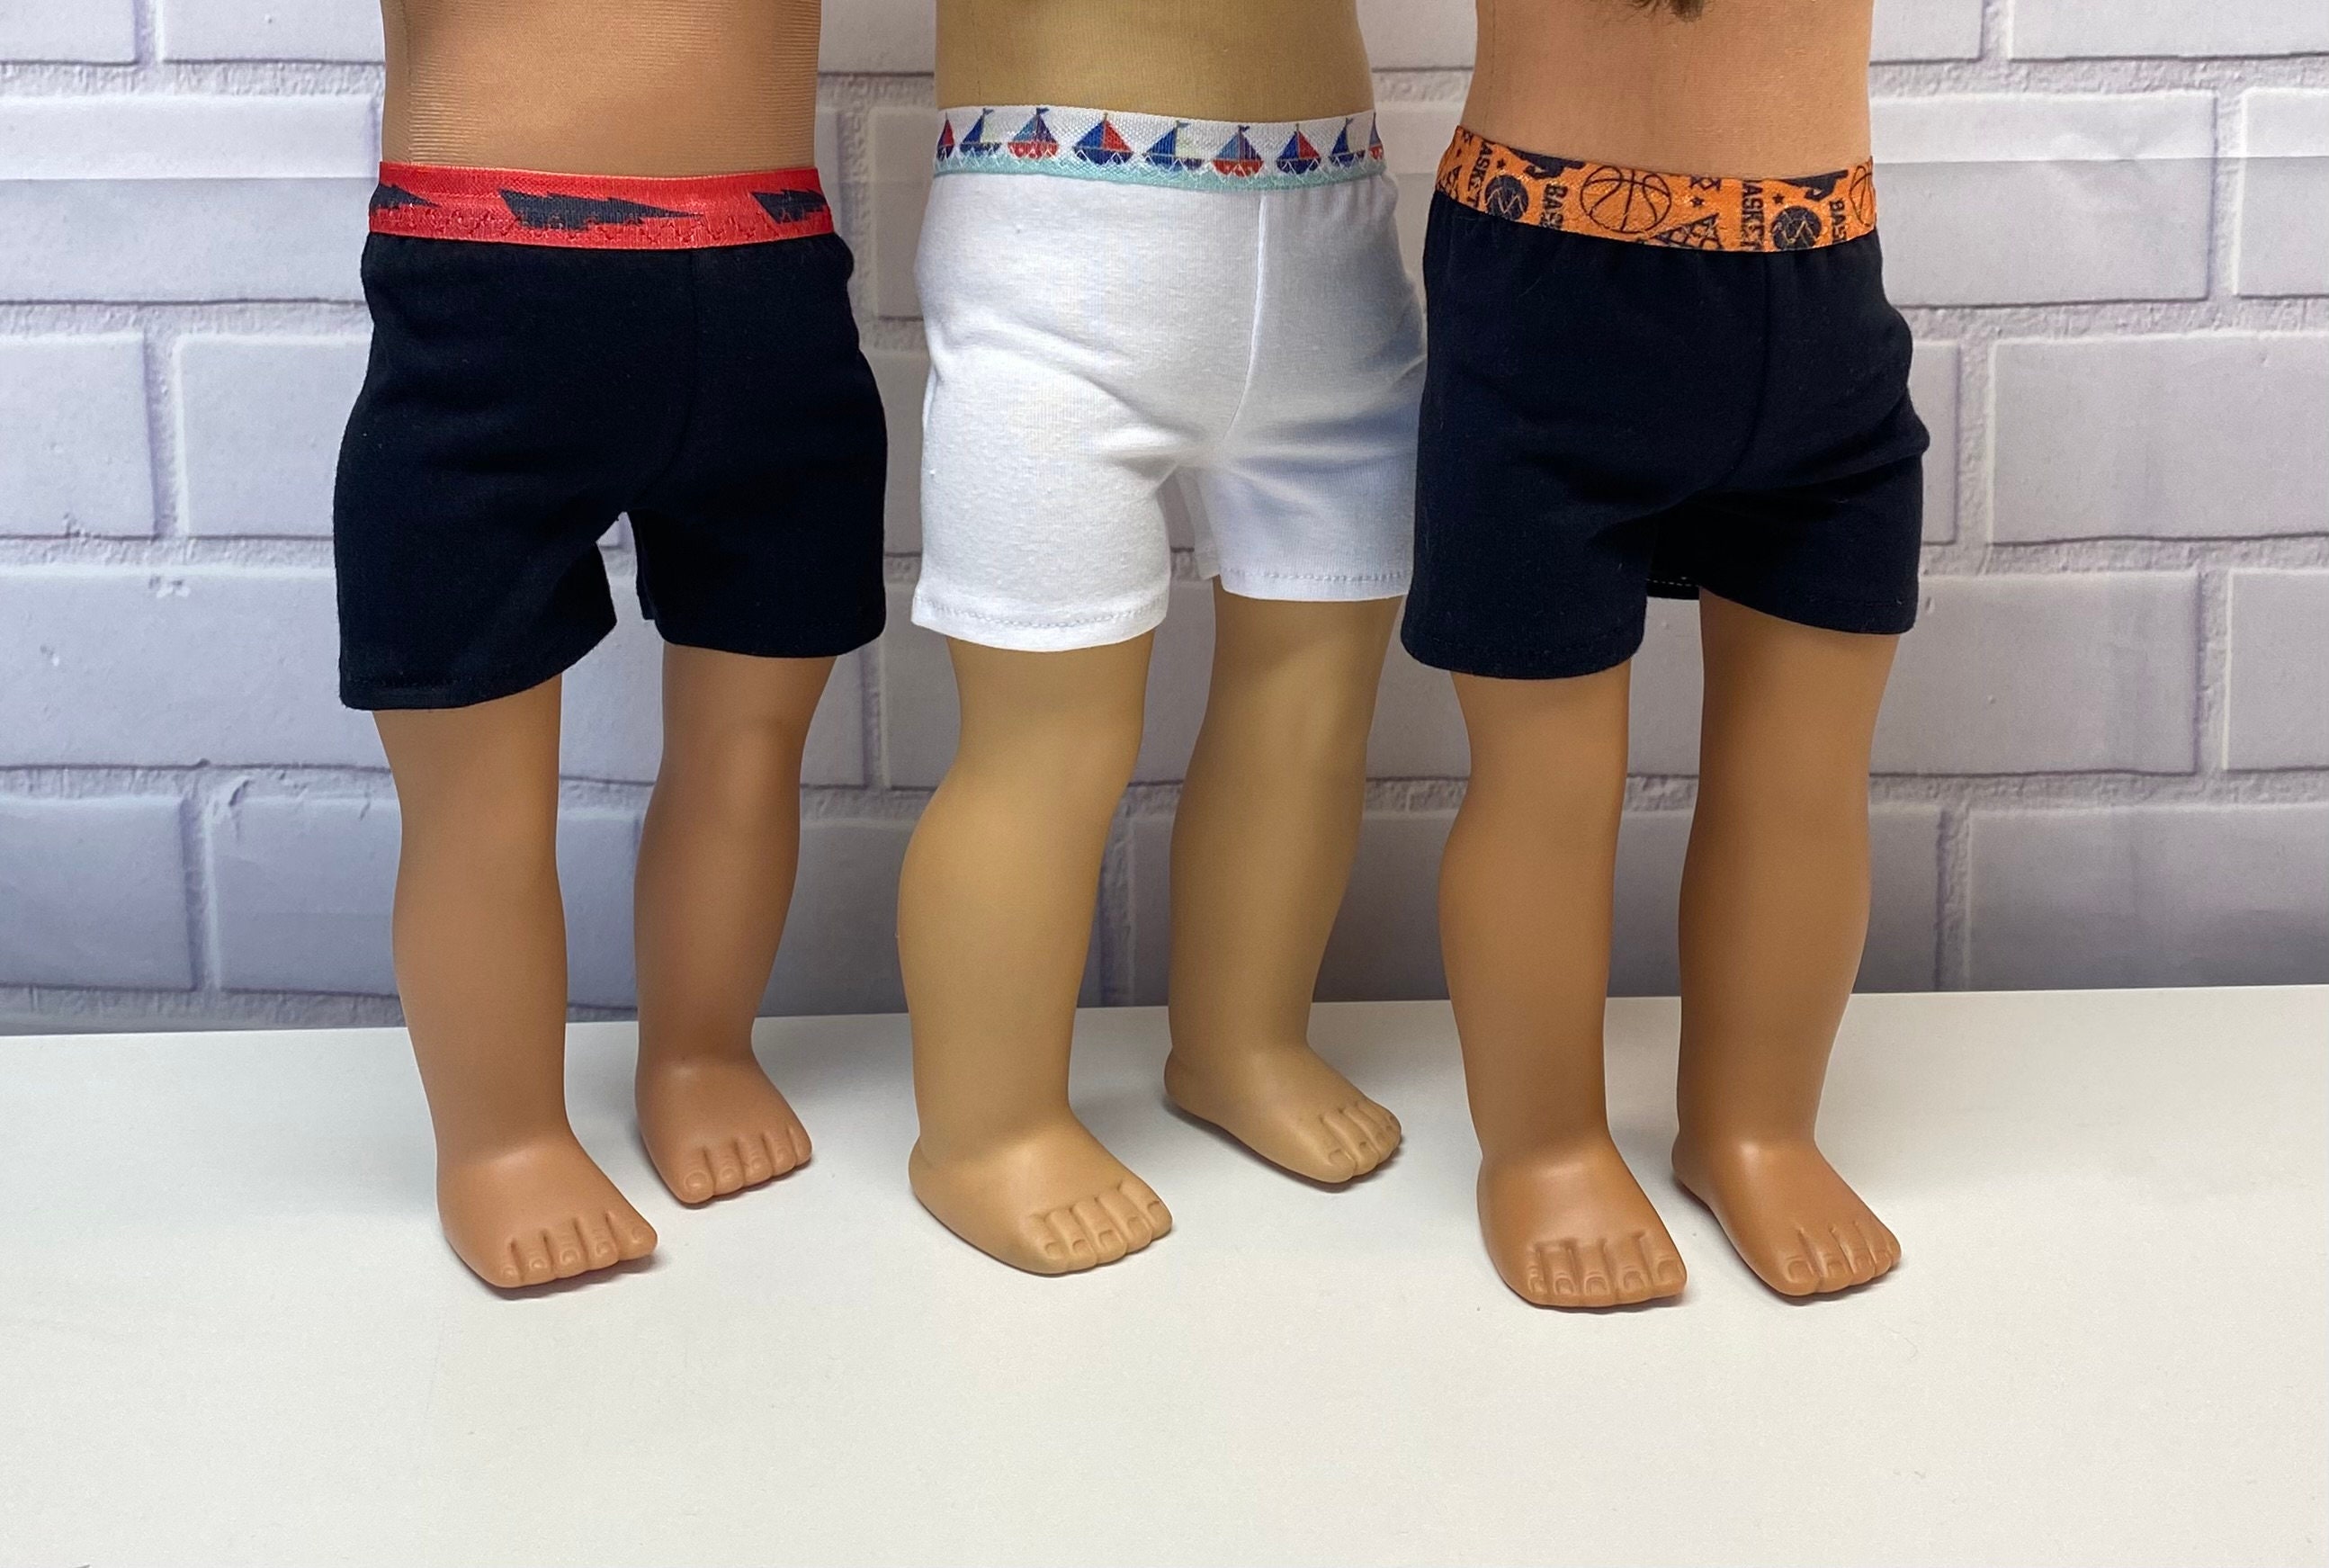 How To Make Boy Doll Boxer Shorts